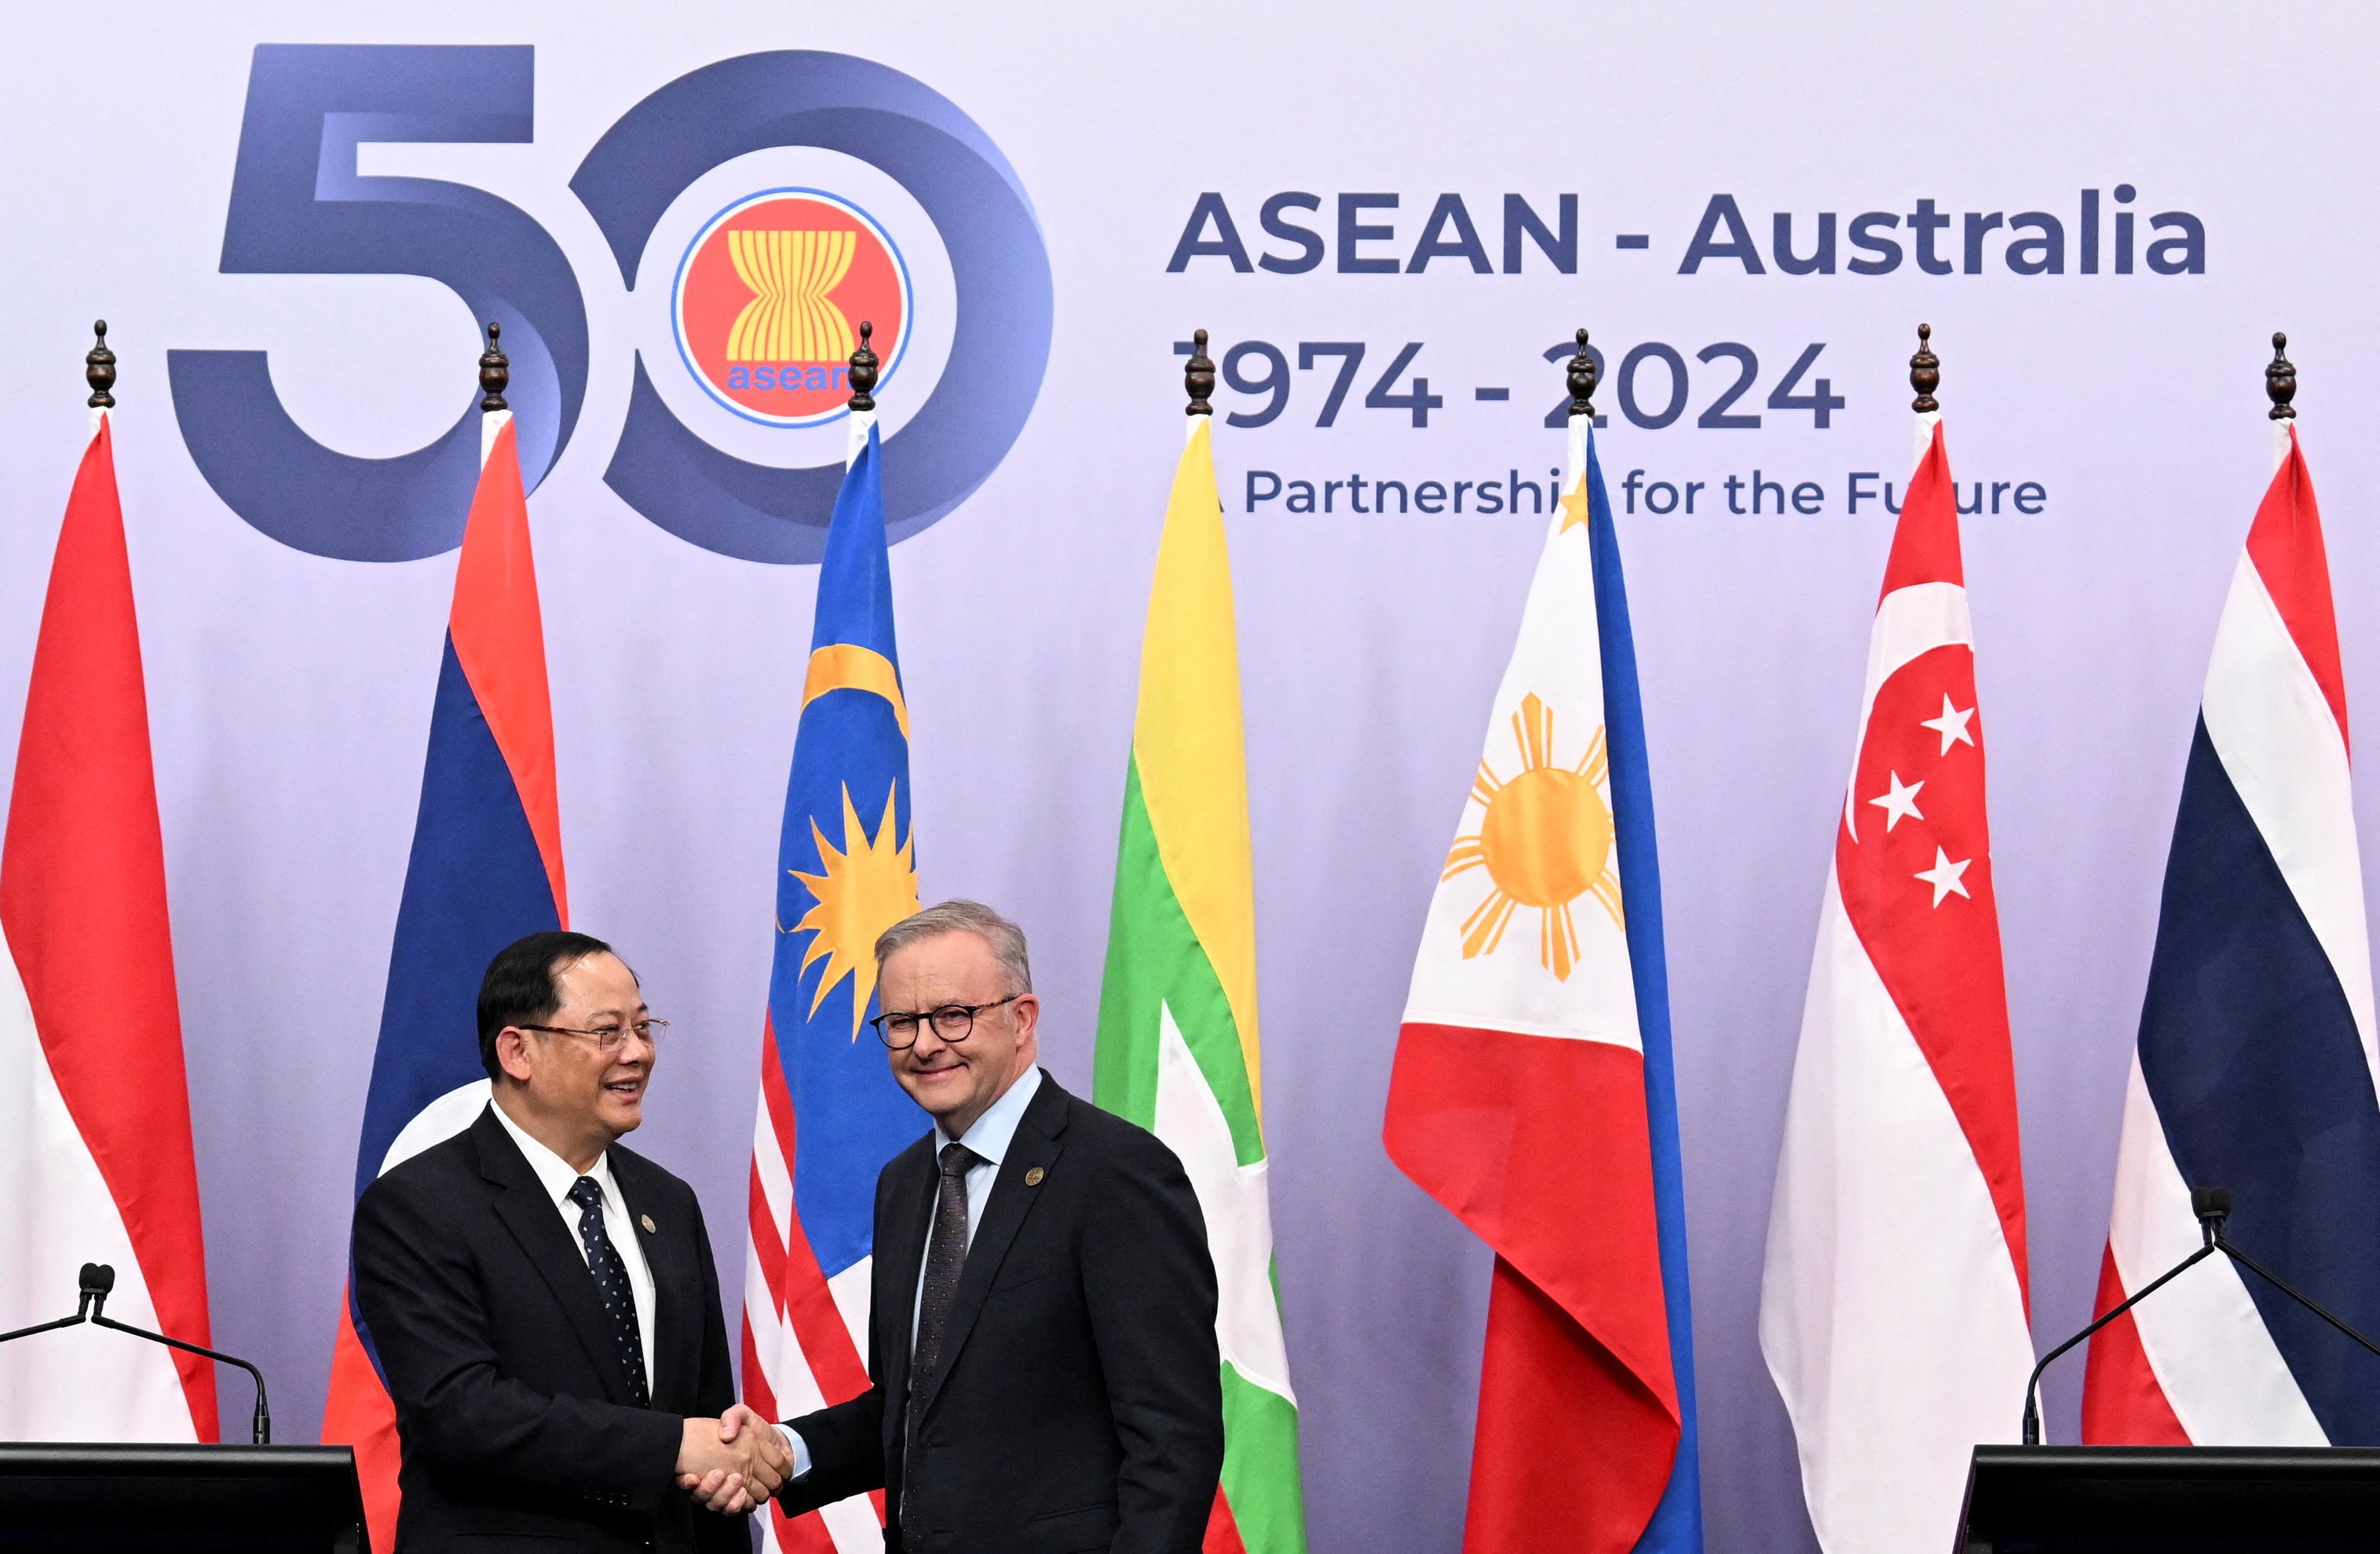 Australia’s Prime Minister Anthony Albanese (right) shakes hands with Laos’ Prime Minister Sonexay Siphandone, during the Asean-Australia Special Summit in Melbourne, Australia, on March 6. Photo: Reuters